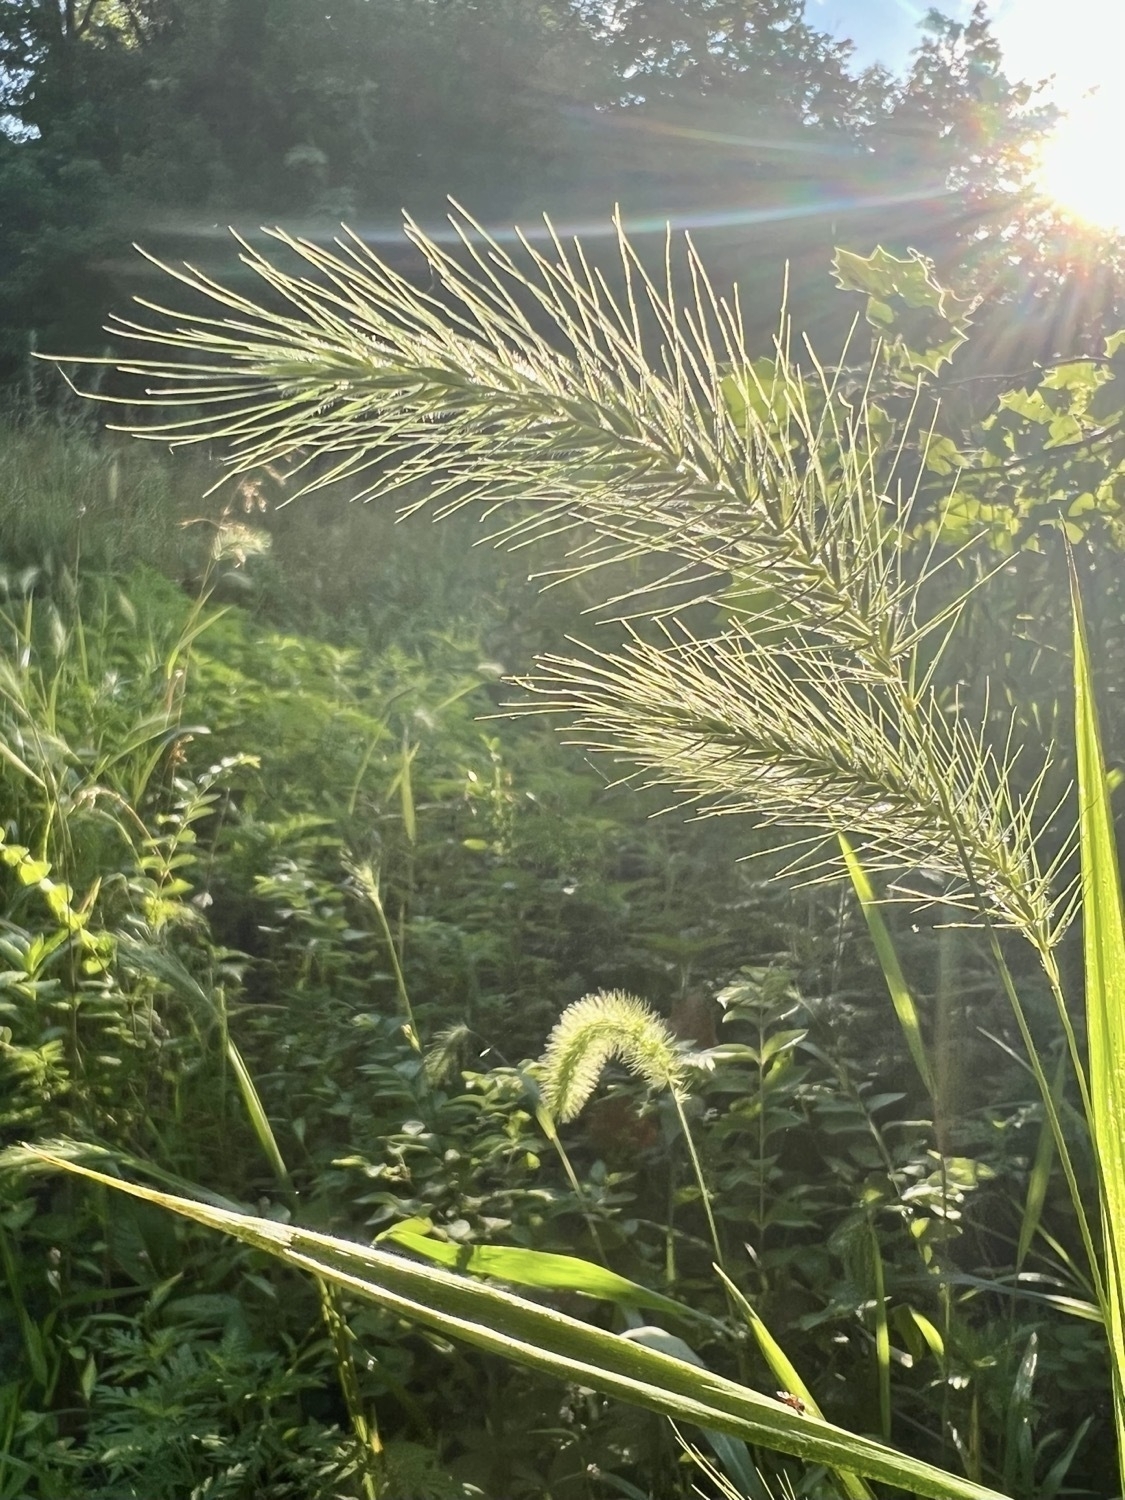 A close-up image of seed heads of grass, likely foxtail. Behind the grass is a mix of plants in a meadow lit by morning sun. The sun is in the top right corner of the image and the longest ray of light seems to bend as it crosses over the top of the seed head. Trees and a hint of blue sky are in the background of the meadow